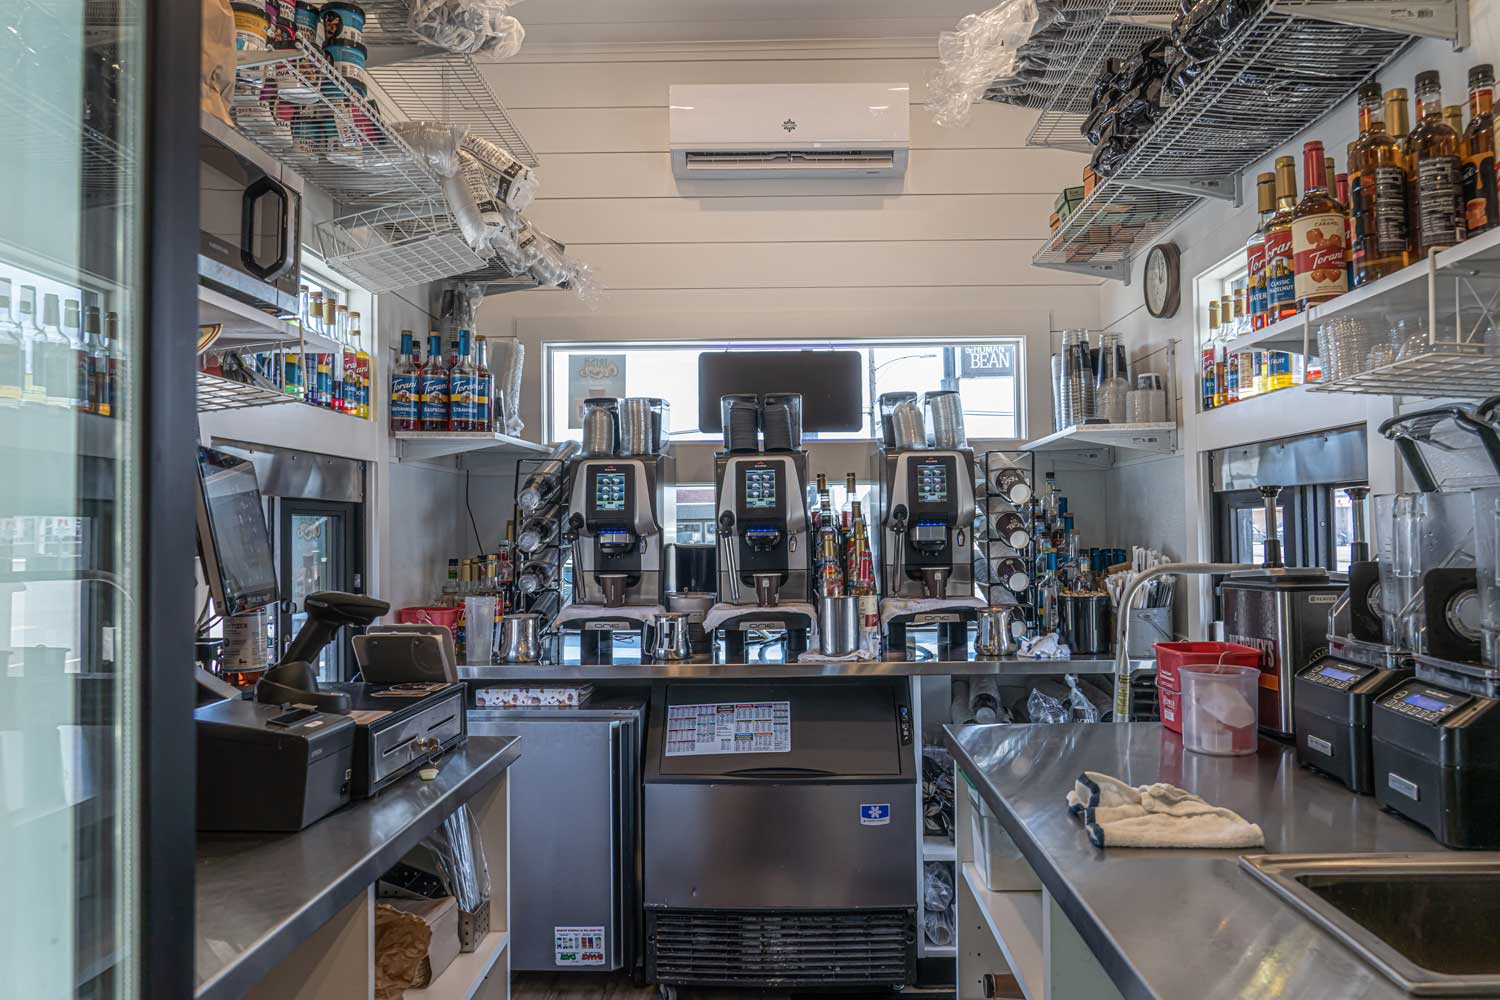 Interior of a custom commercial tiny home set up as a coffee stand with espresso machines, counter space, flavored syrups and more